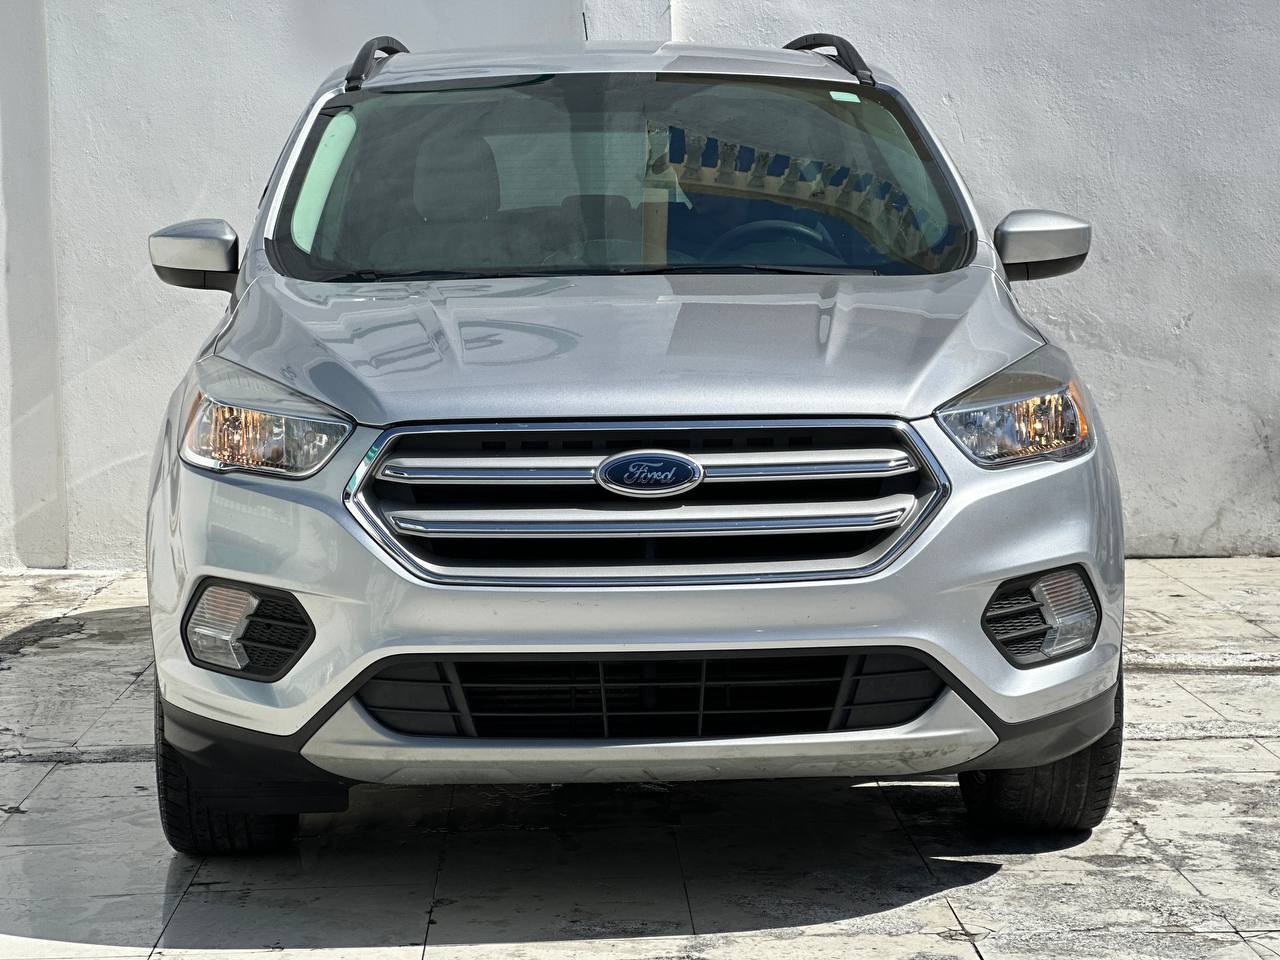 jeepetas y camionetas - FORD ESCAPE Ecoboost turbo 2018CLEAN CARFAX 1